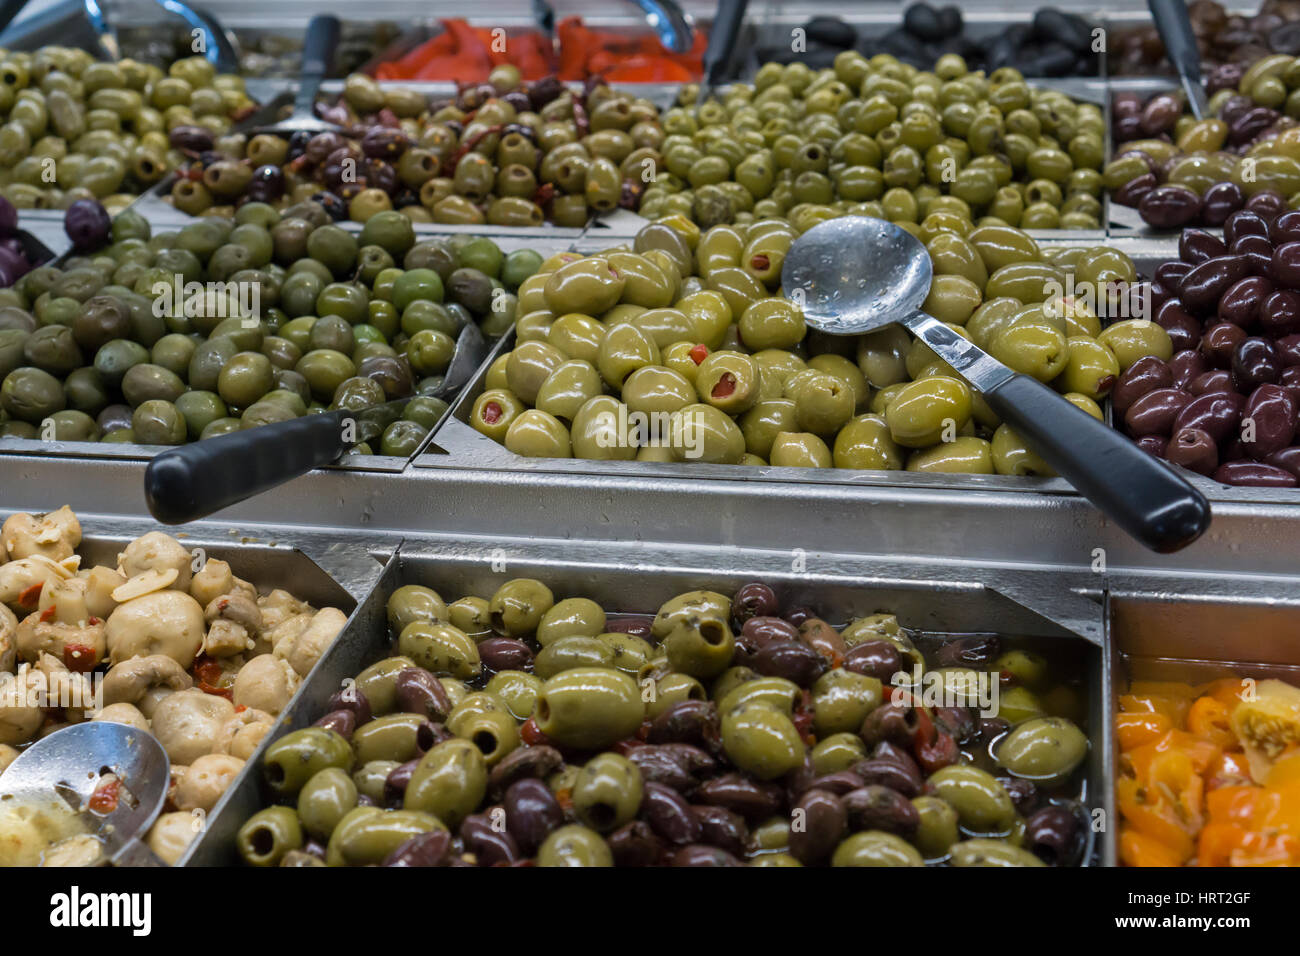 Olive bar in the new Whole Foods Market in Newark, NJ on opening day  Wednesday, March 1, 2017. The store is the chain's 17th store to open in  New Jersey. The 29,000